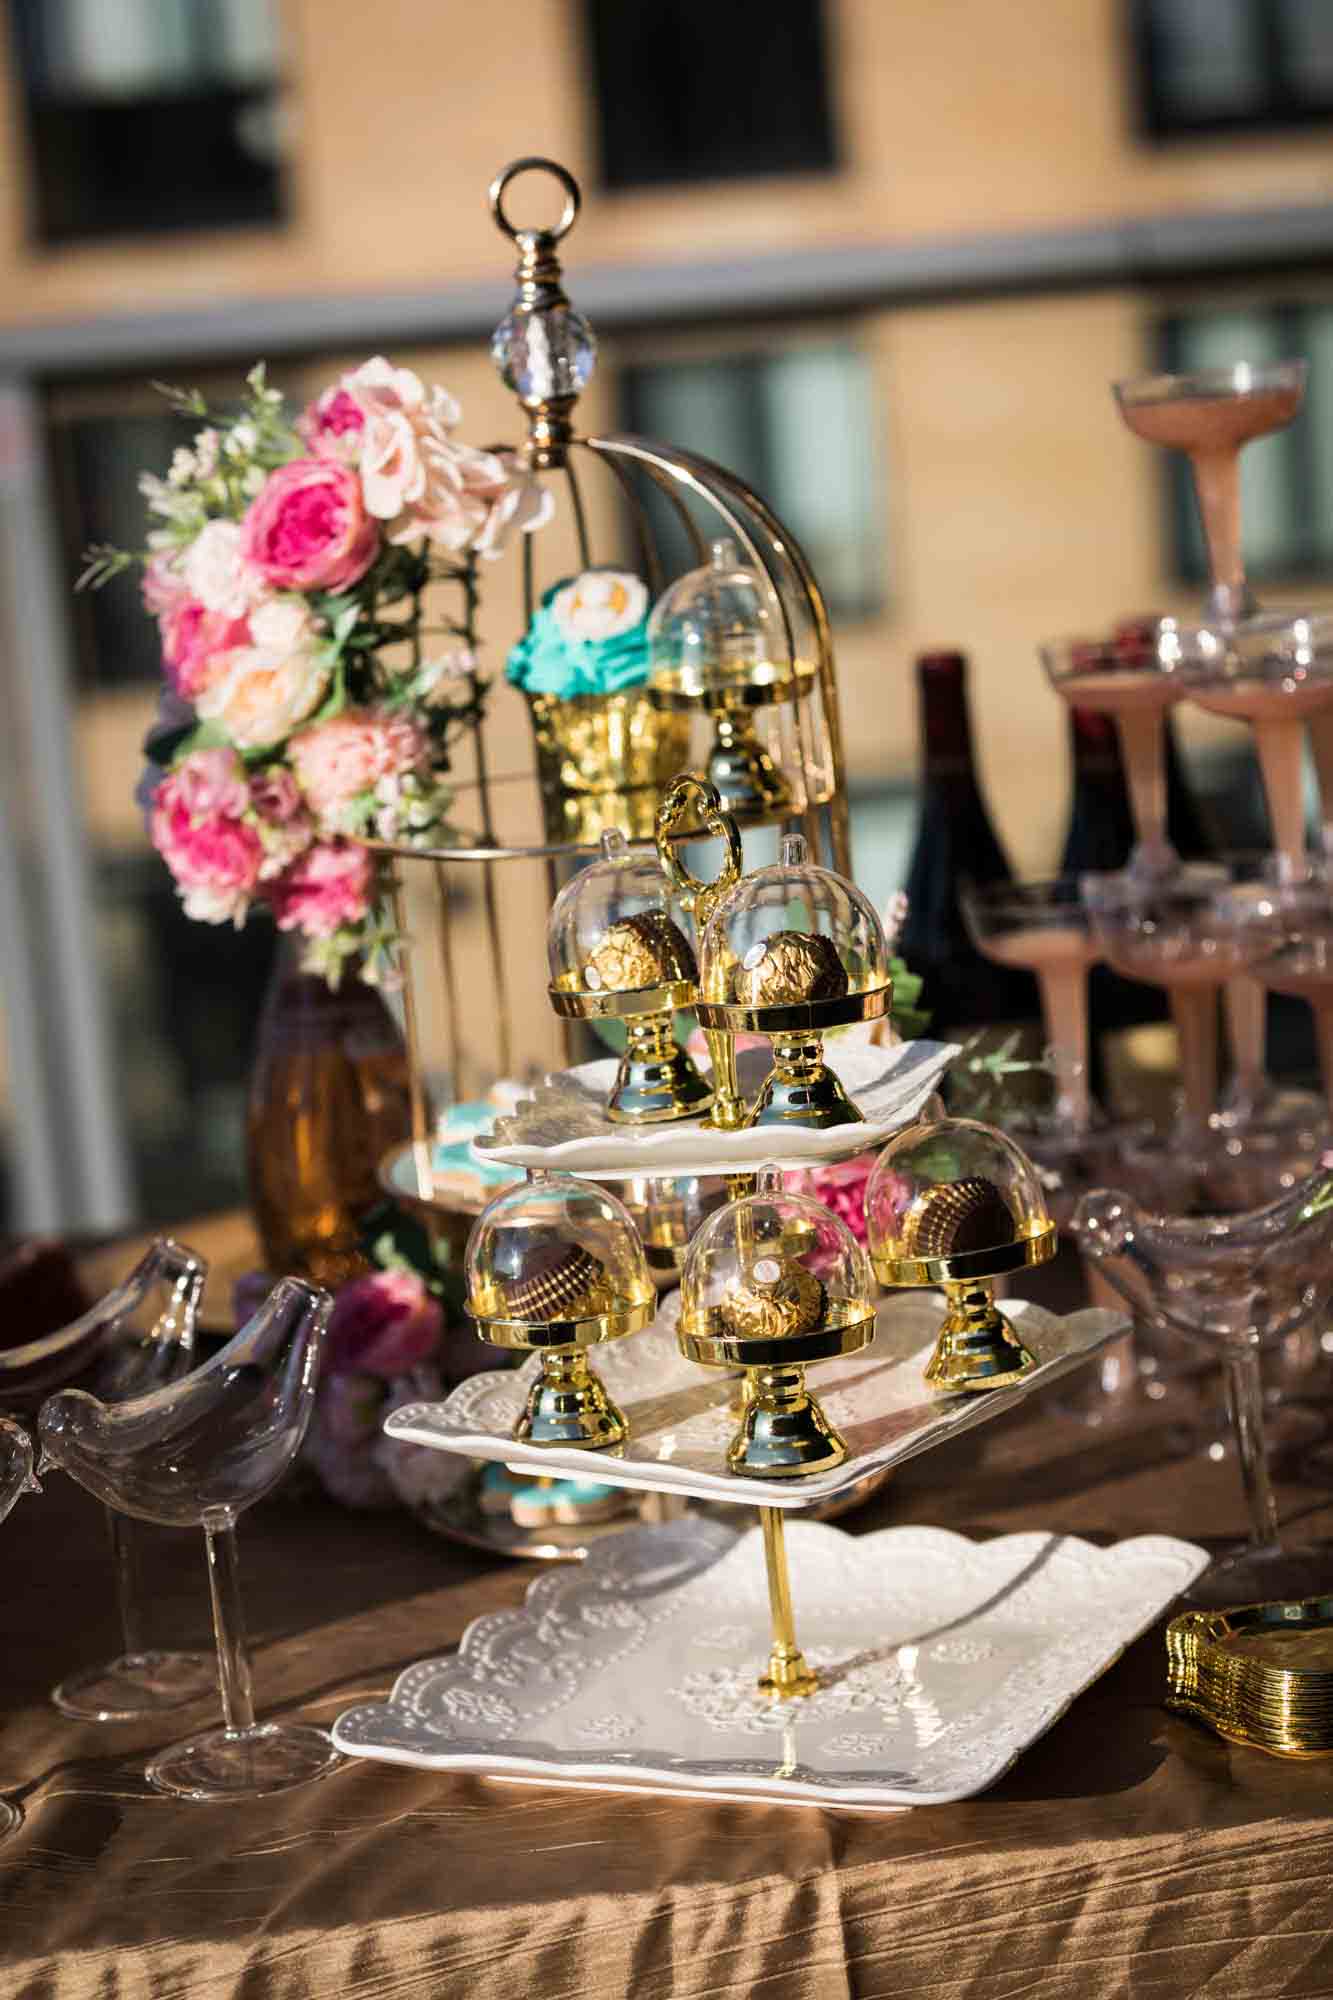 A table filled with elaborately-decorated desserts for a Marie Antoinette-themed party